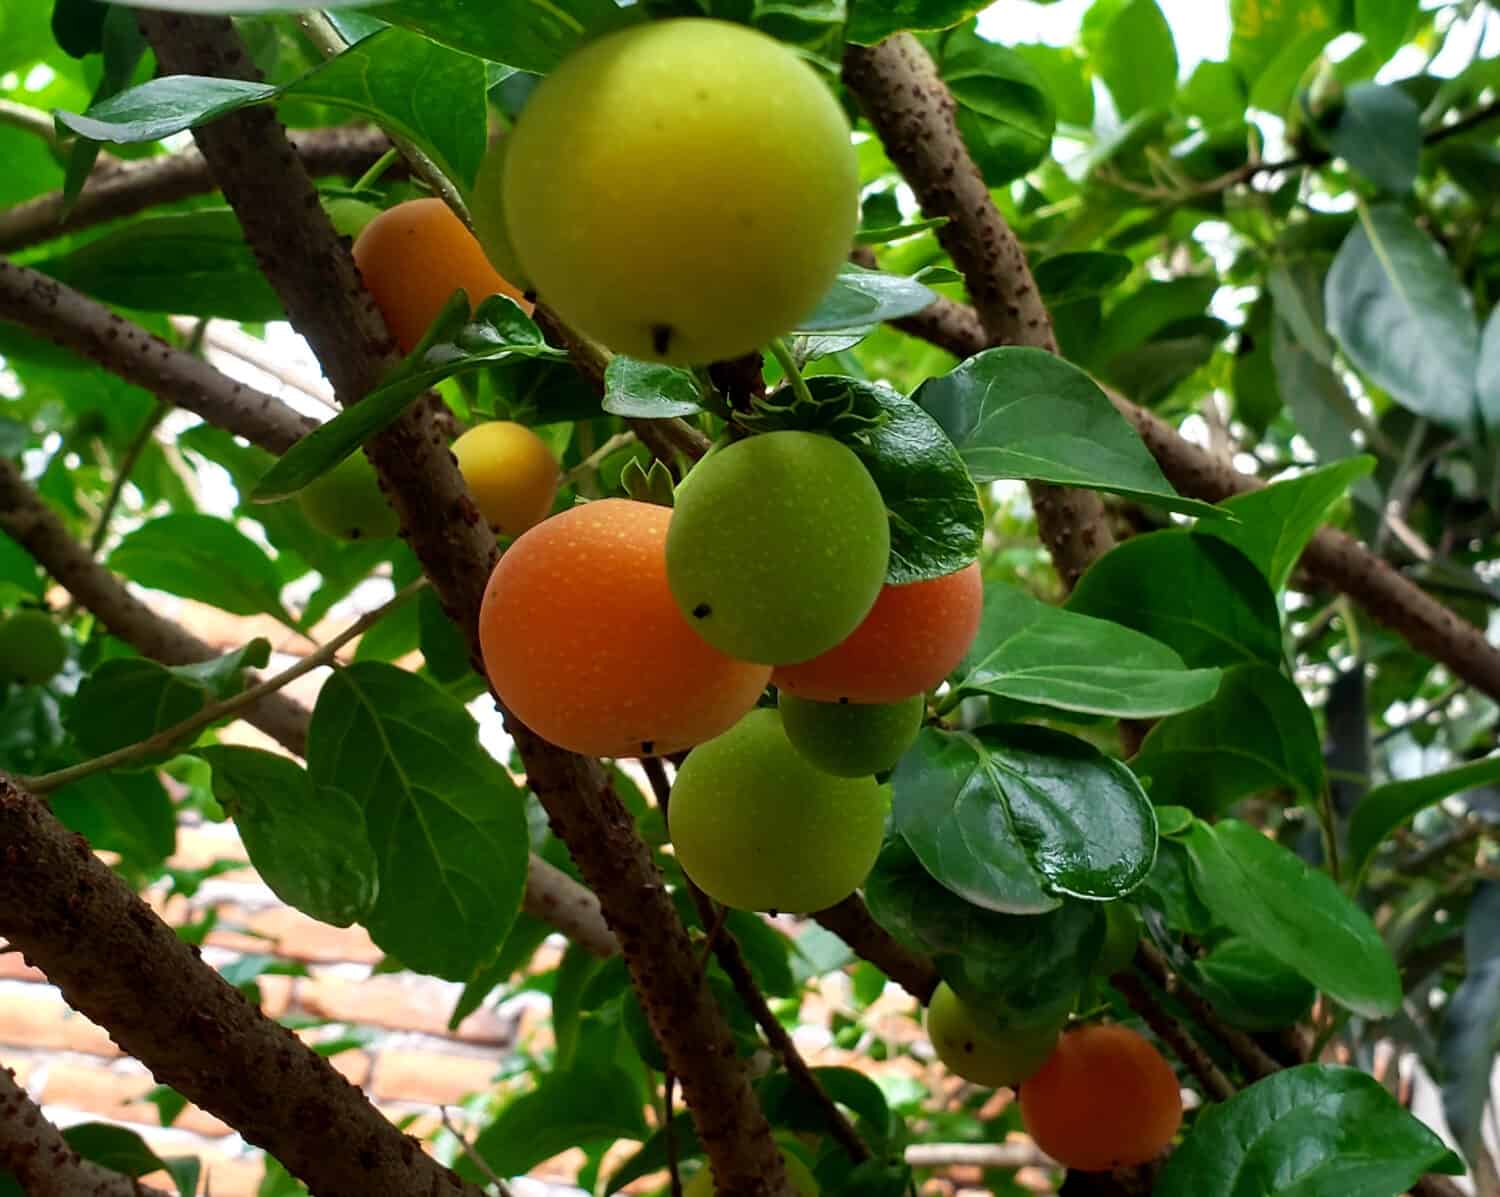 Chinese plum, scientific name of this yummy acid friuit is: Dovyalis abyssinica. Also known as Japanese plum. 